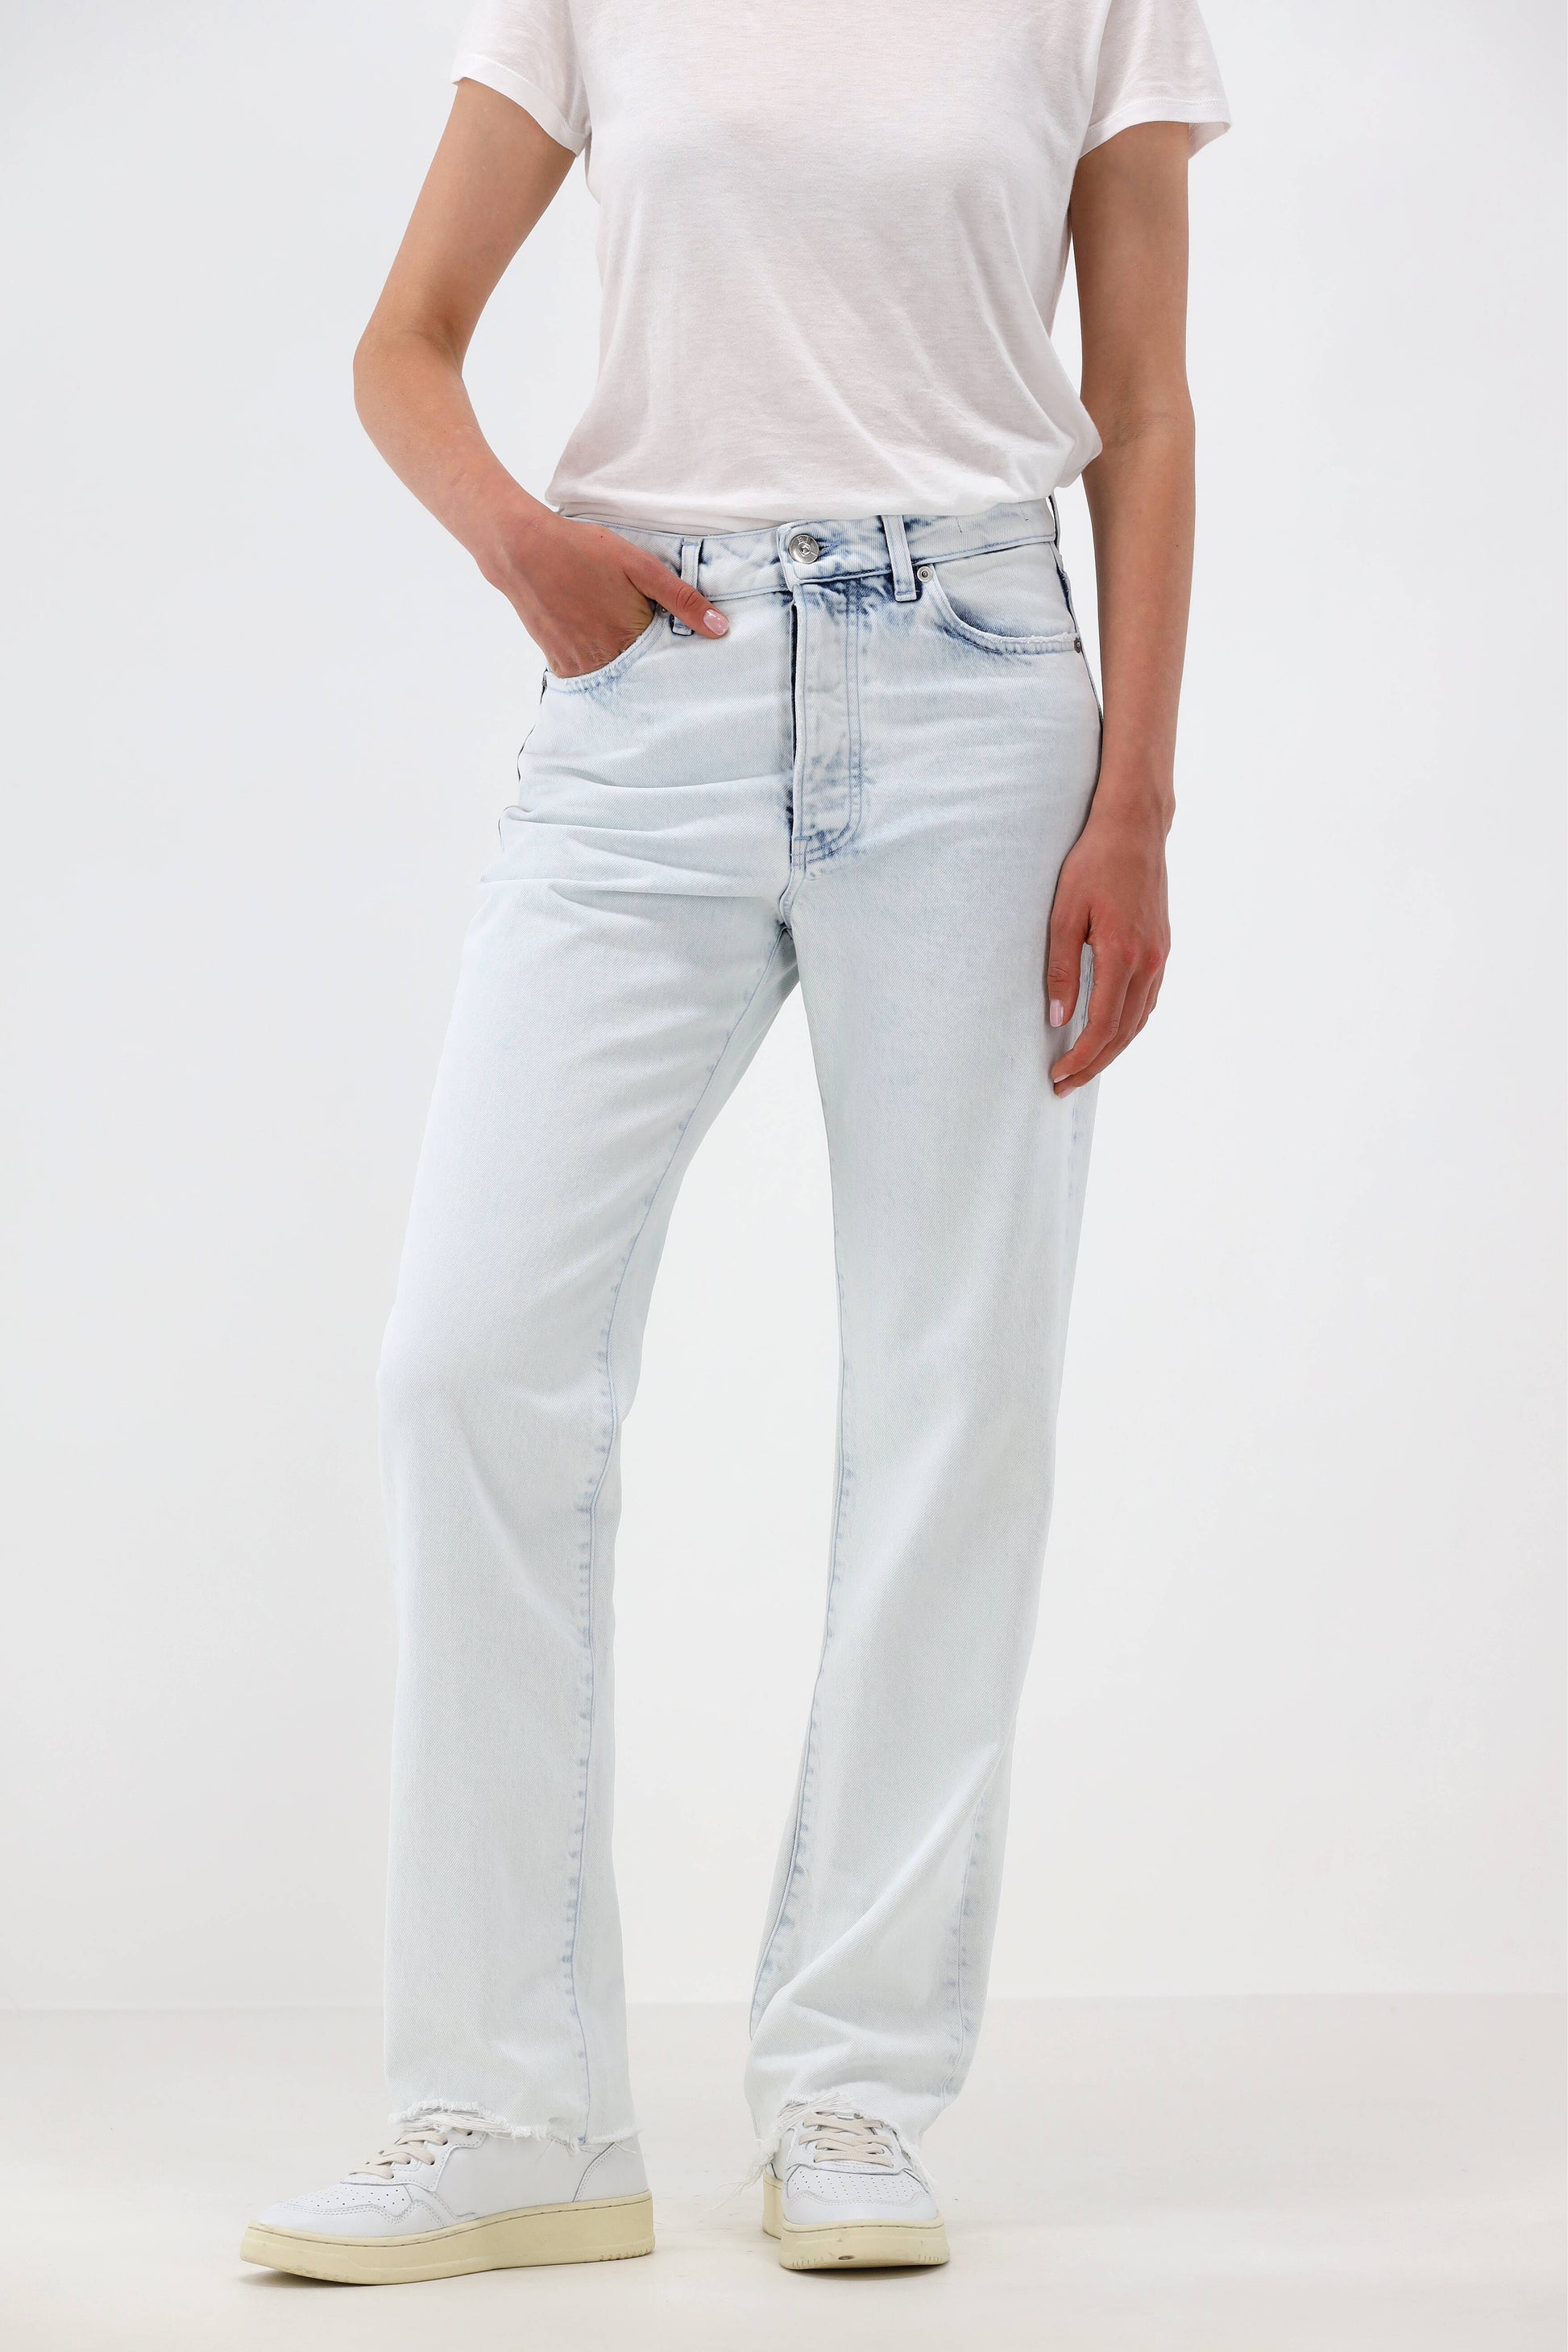 Jeans Sabina in Mineral Ice Blue3x1 - Anita Hass